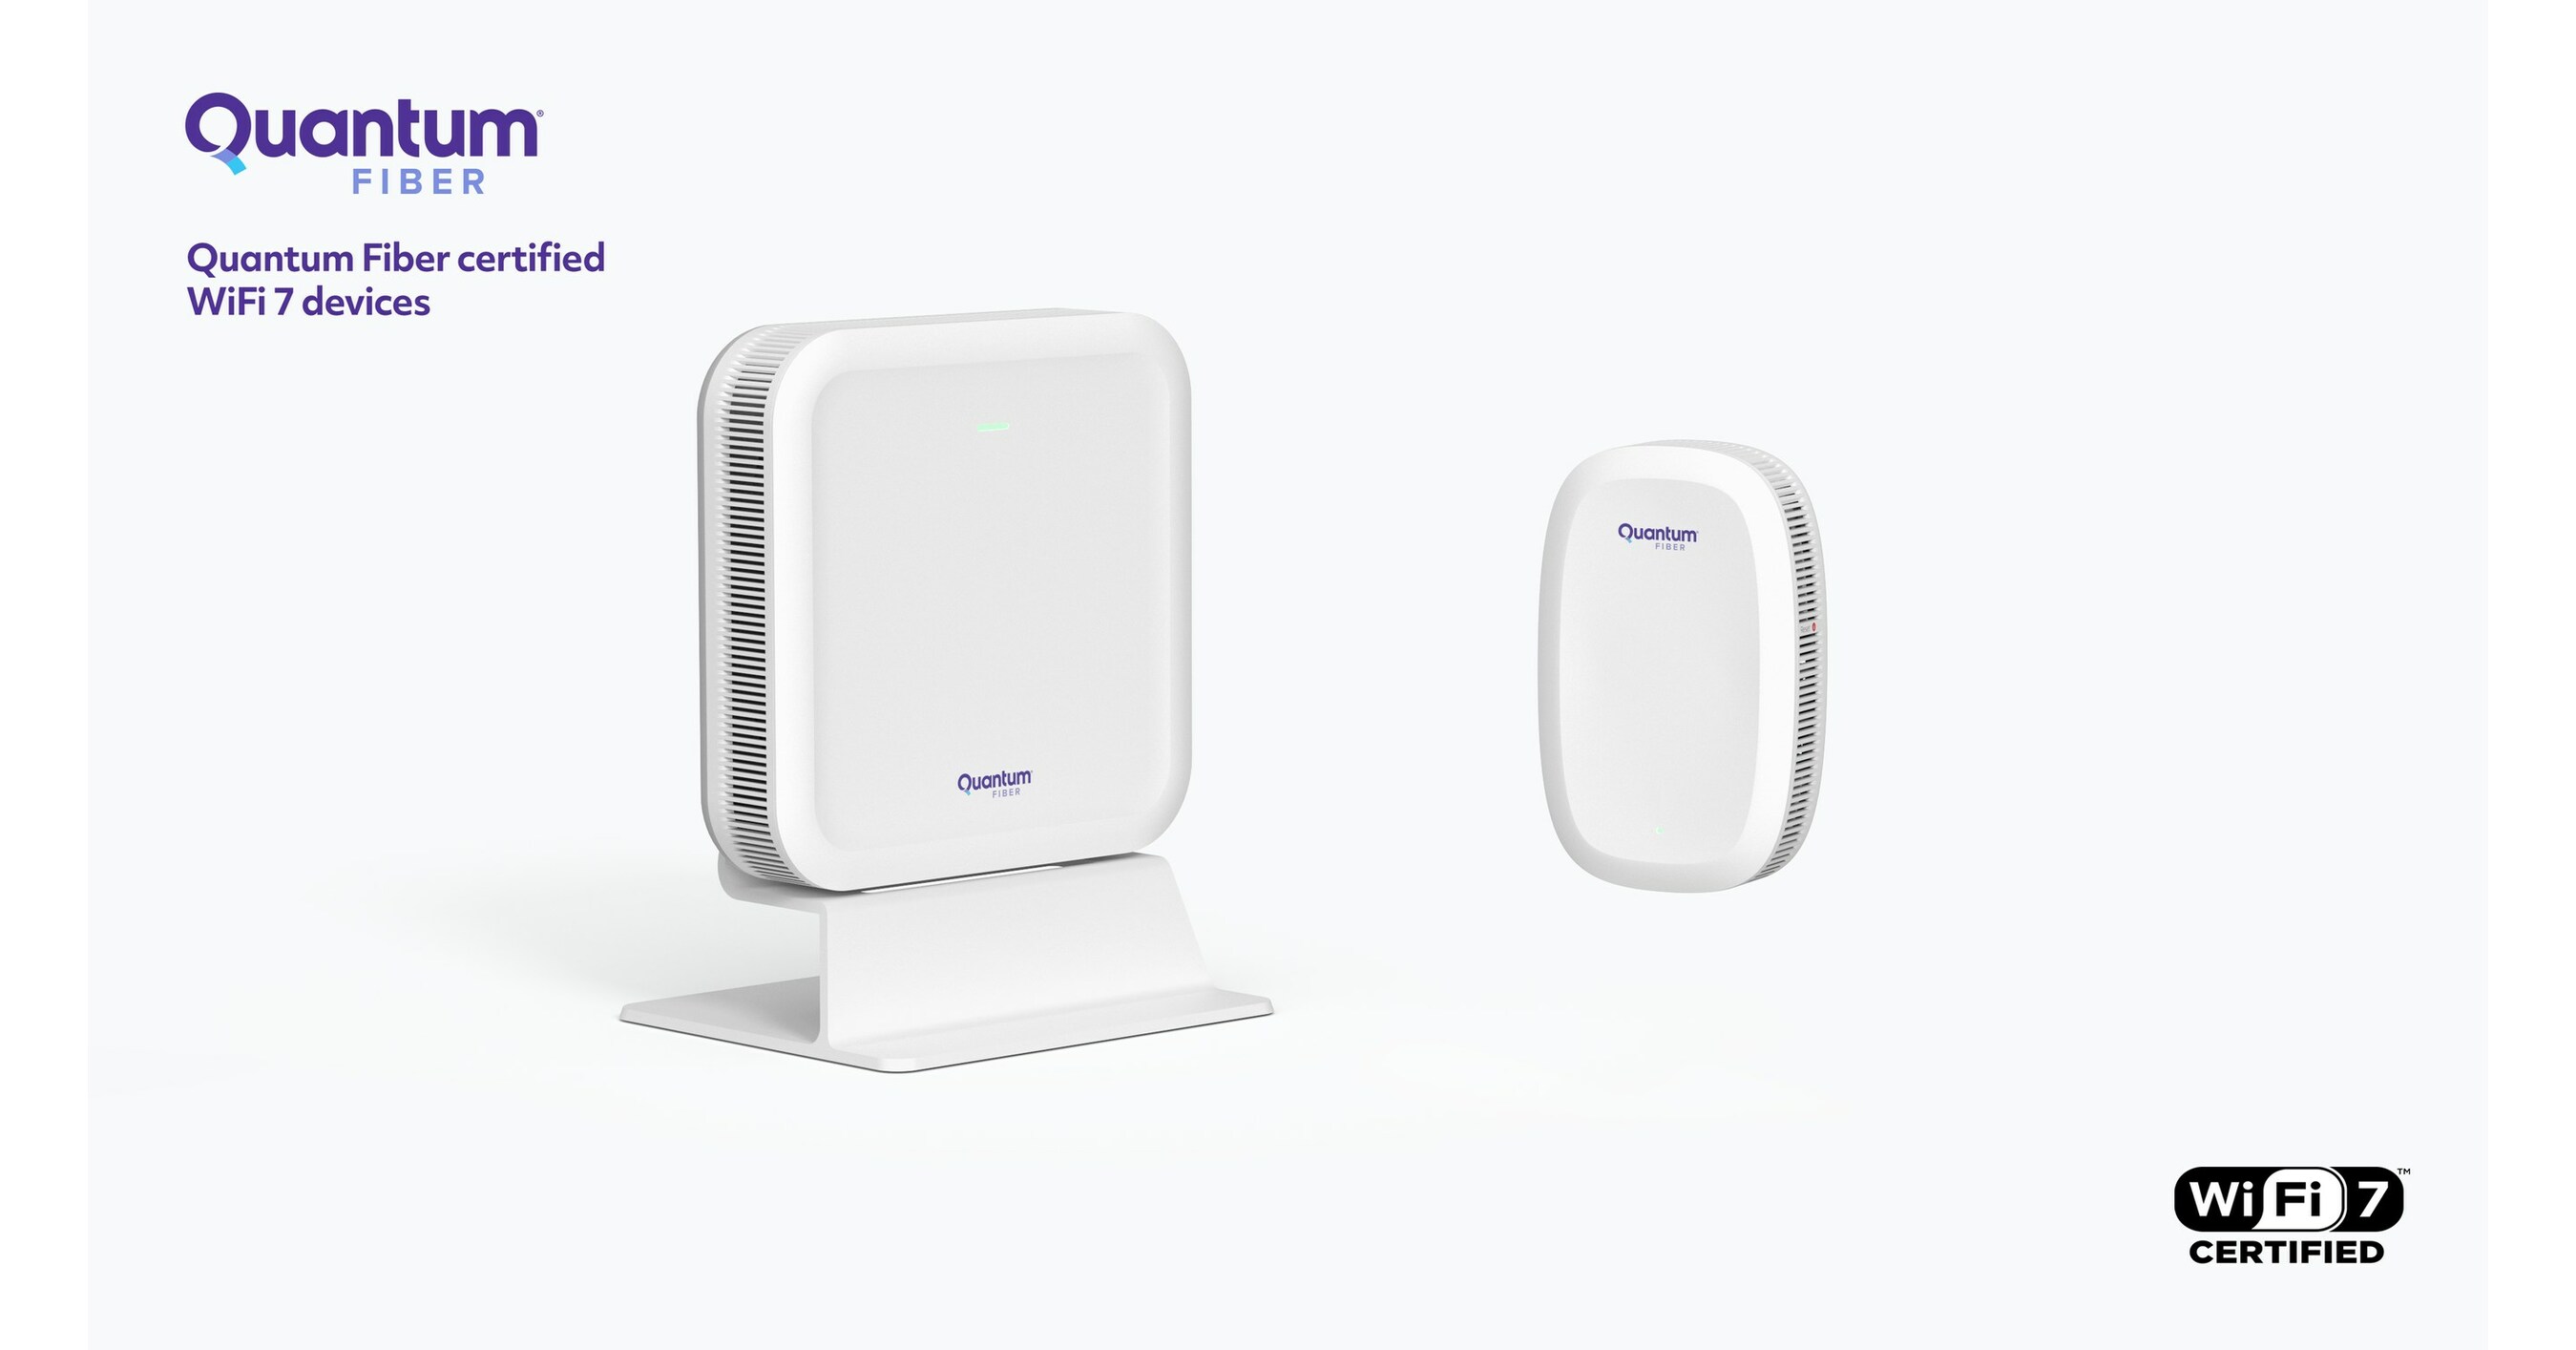 Lumen is first in the industry to achieve a Wi-Fi CERTIFIED 7